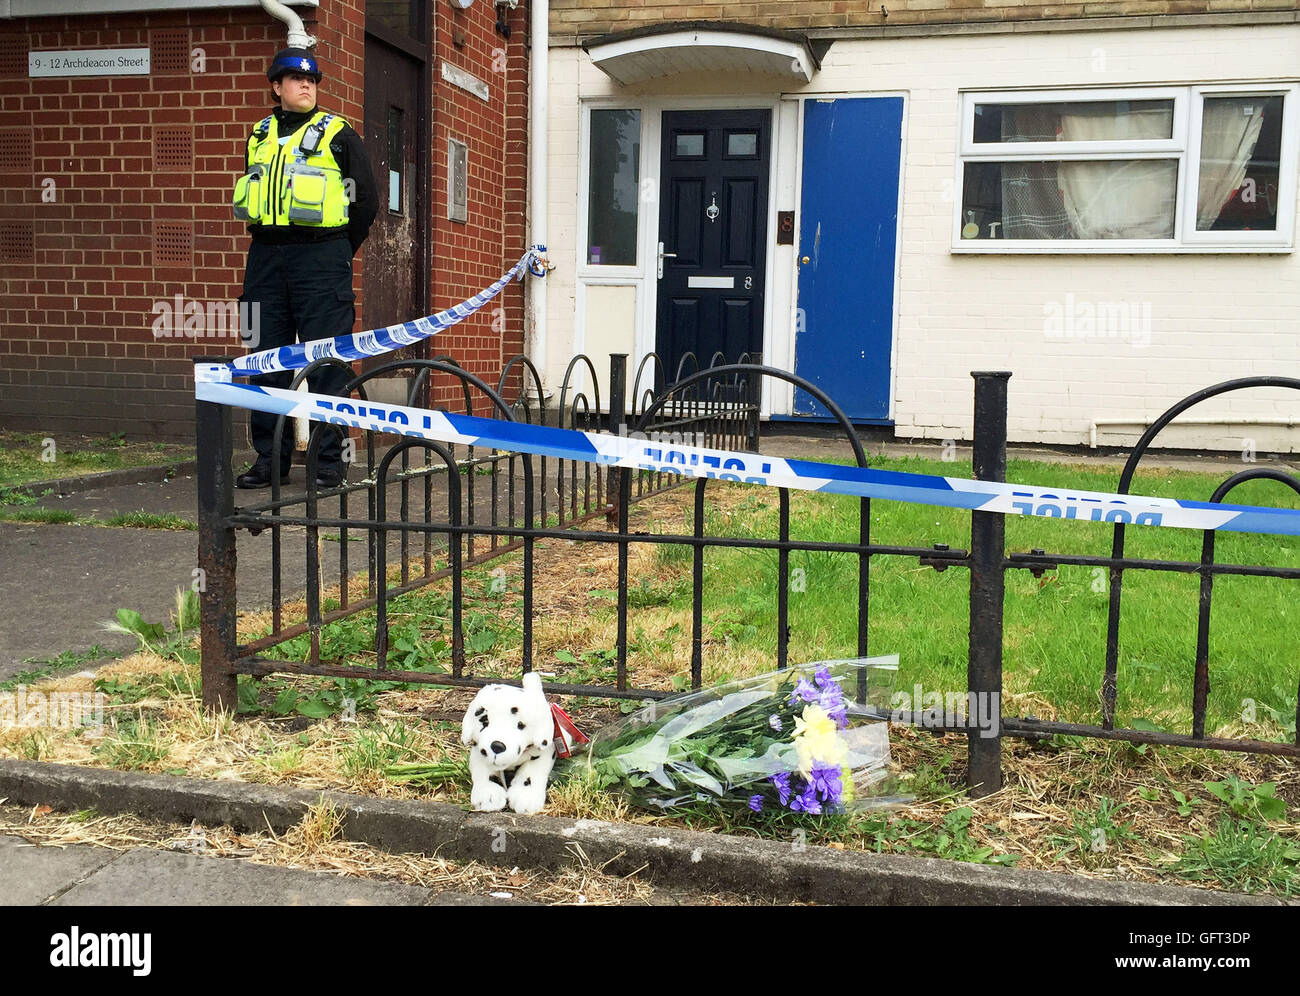 A police officer stands outside a property in Archdeacon Street, Gloucester, where a baby boy was seriously injured in an incident and has died. Stock Photo